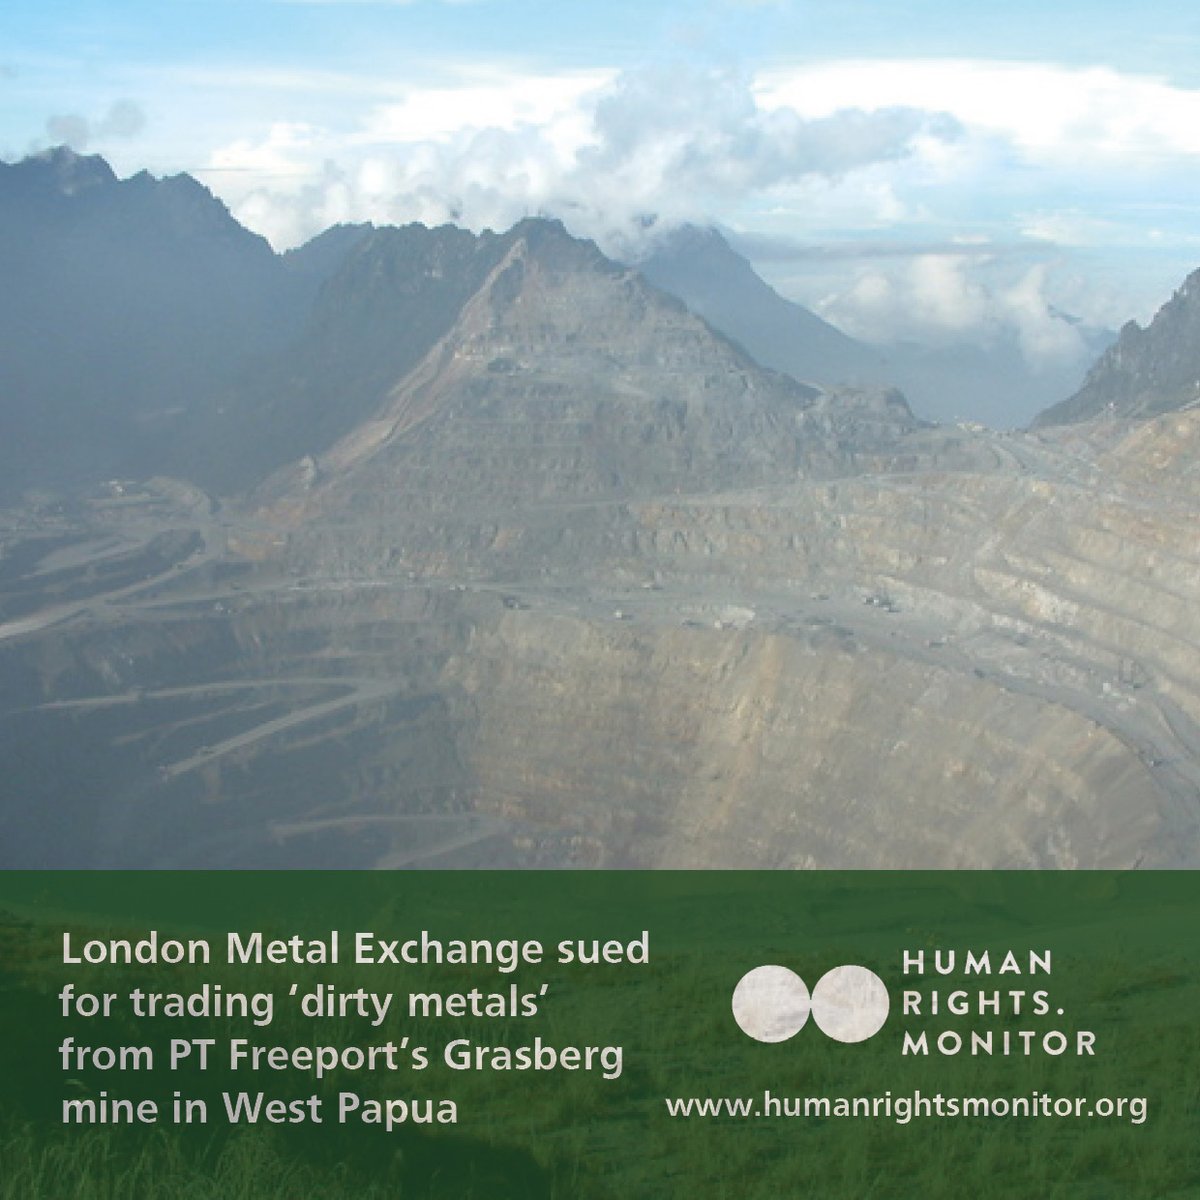 London Metal Exchange sued in UK High Court for trading ‘dirty metals’ from PT Freeport's Grasberg mine in #WestPapua 

more info: tinyurl.com/h59x3bwt 

#HumanRights #dirtymetals @londonmining @GLAN_LAW @IDFreeport